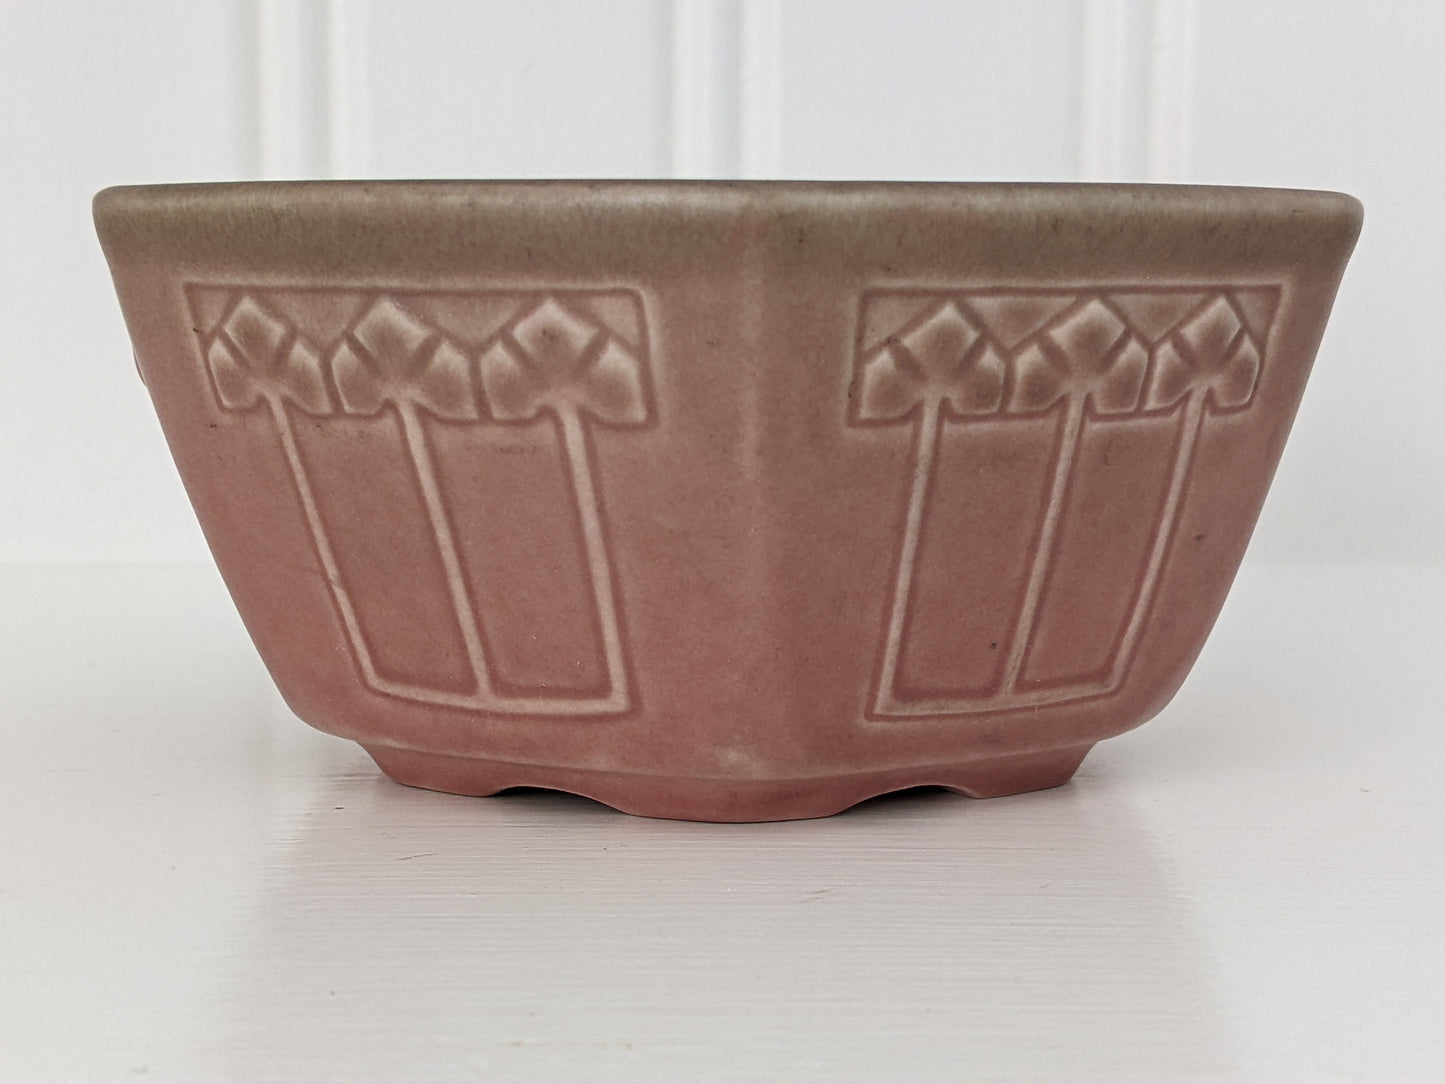 Antique Rookwood Pottery Planter No. 1770, Dated 1923